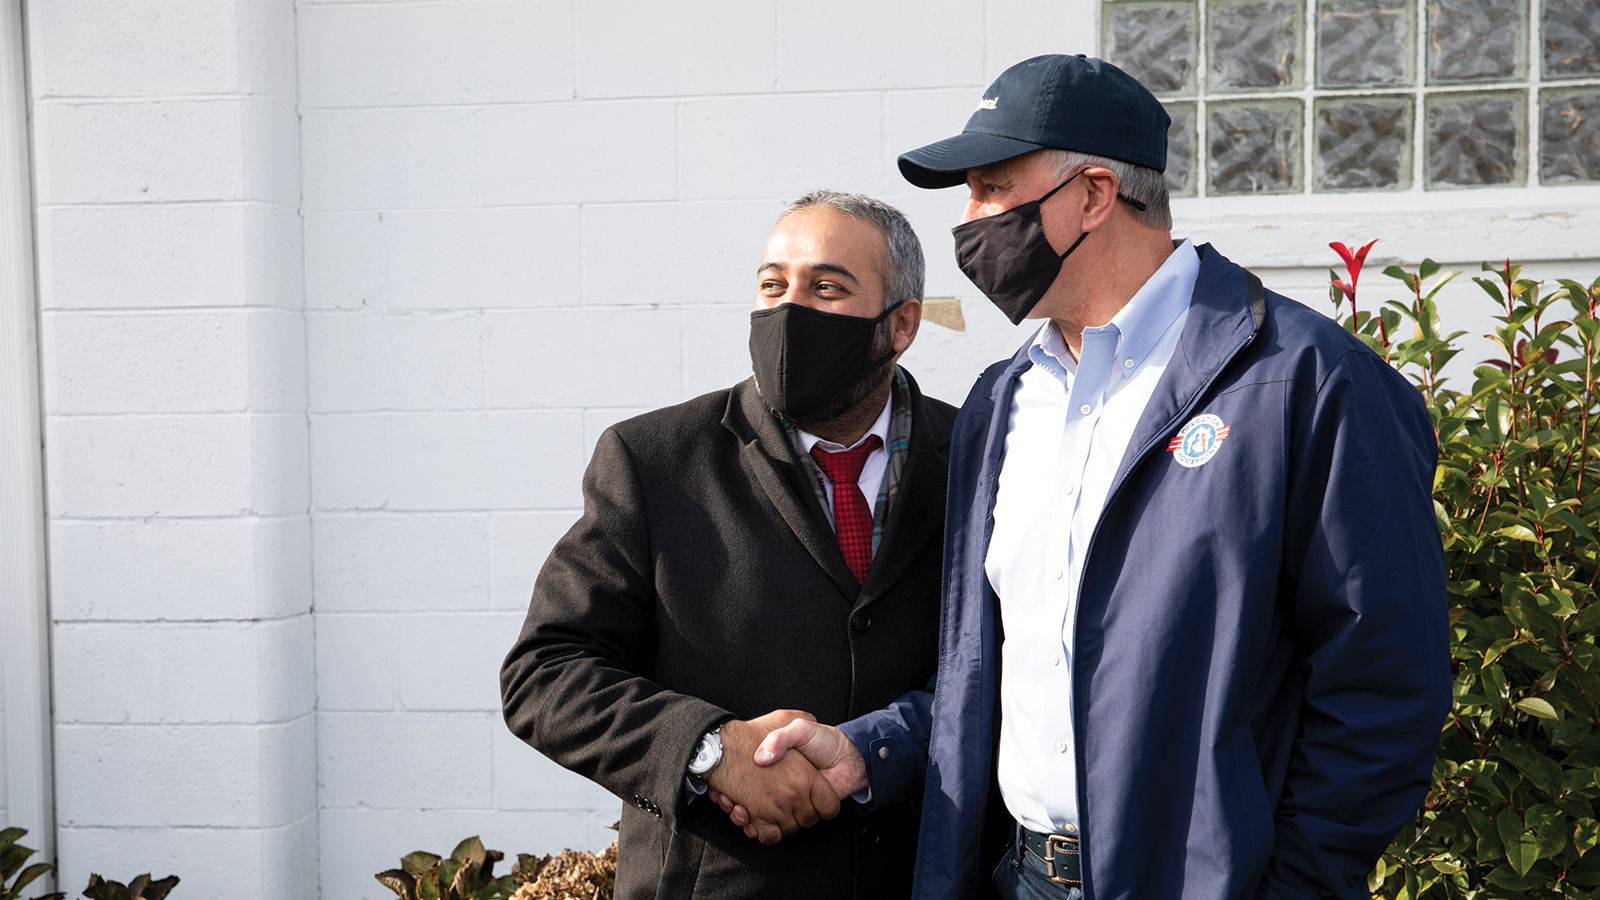 Two masked individuals shaking hands.